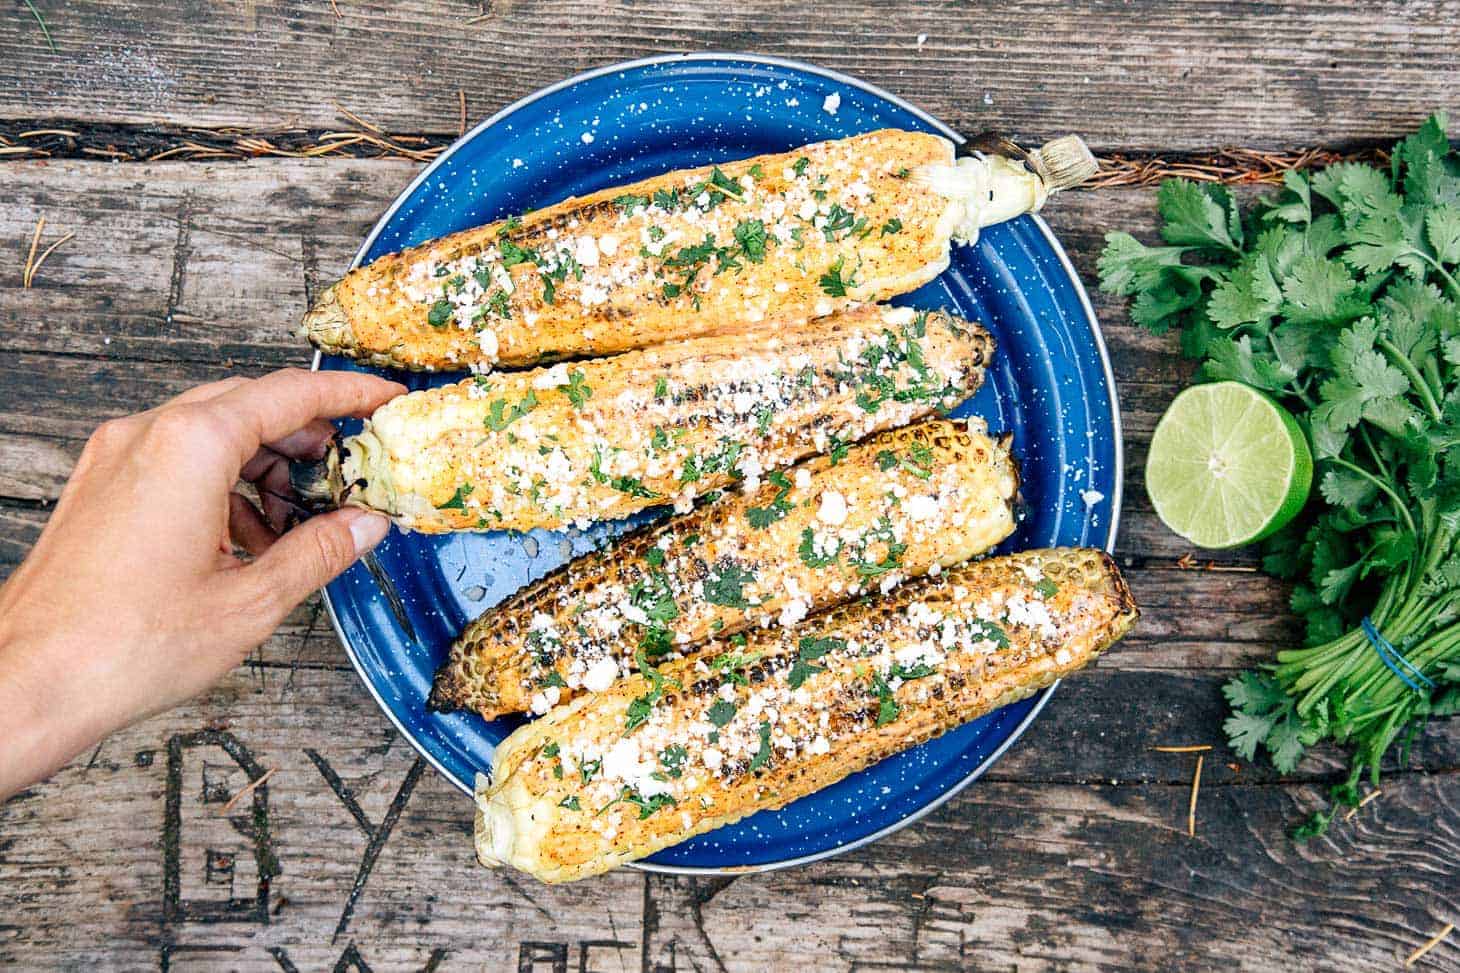 A blue plate with four charred corn on the cob sprinkled with cheese and herbs and one hand reach out and grabbing one. Lime and herbs are on the side.